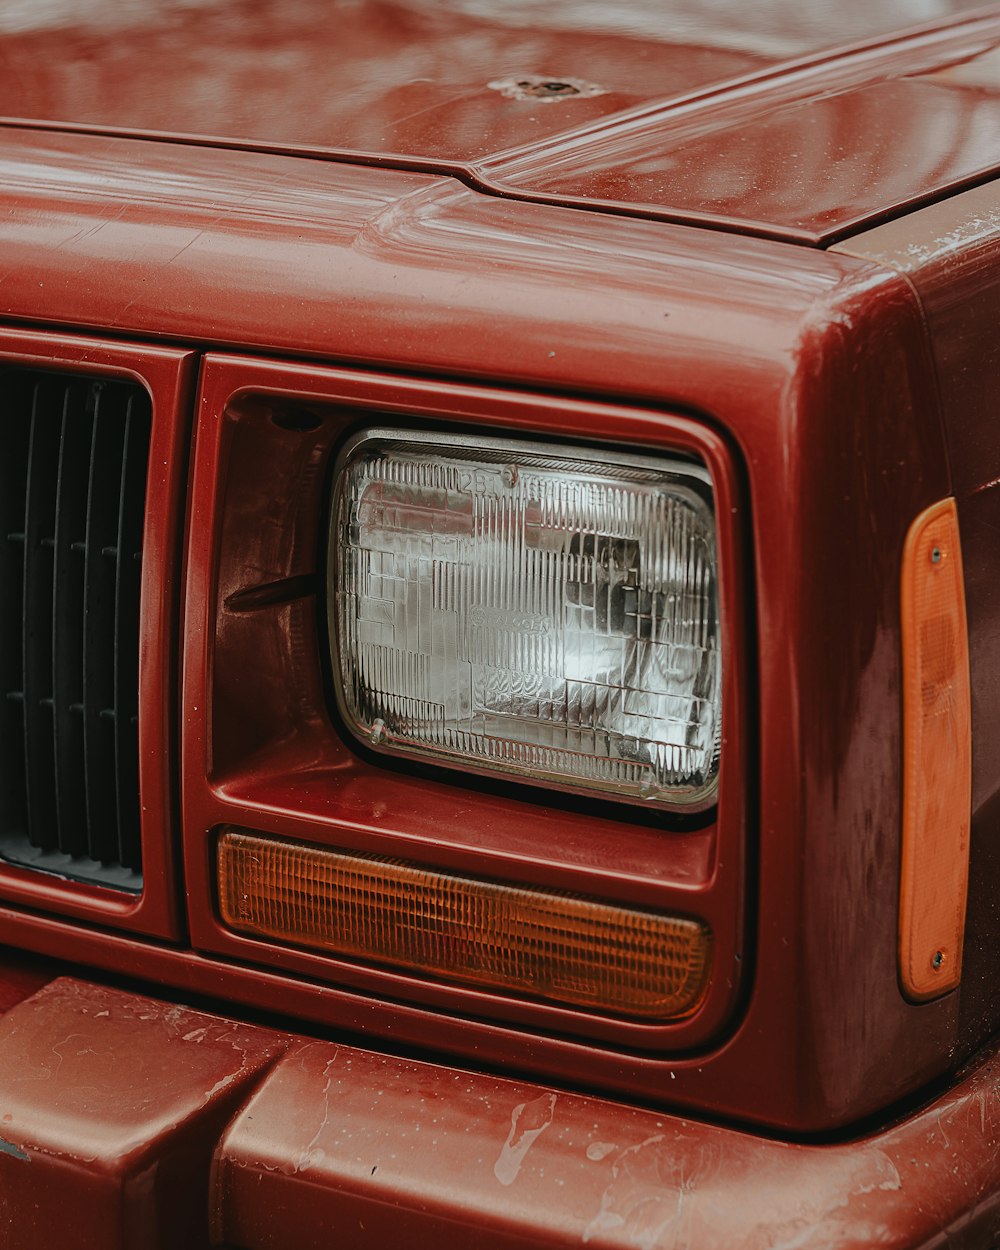 a close up of the front end of a red truck